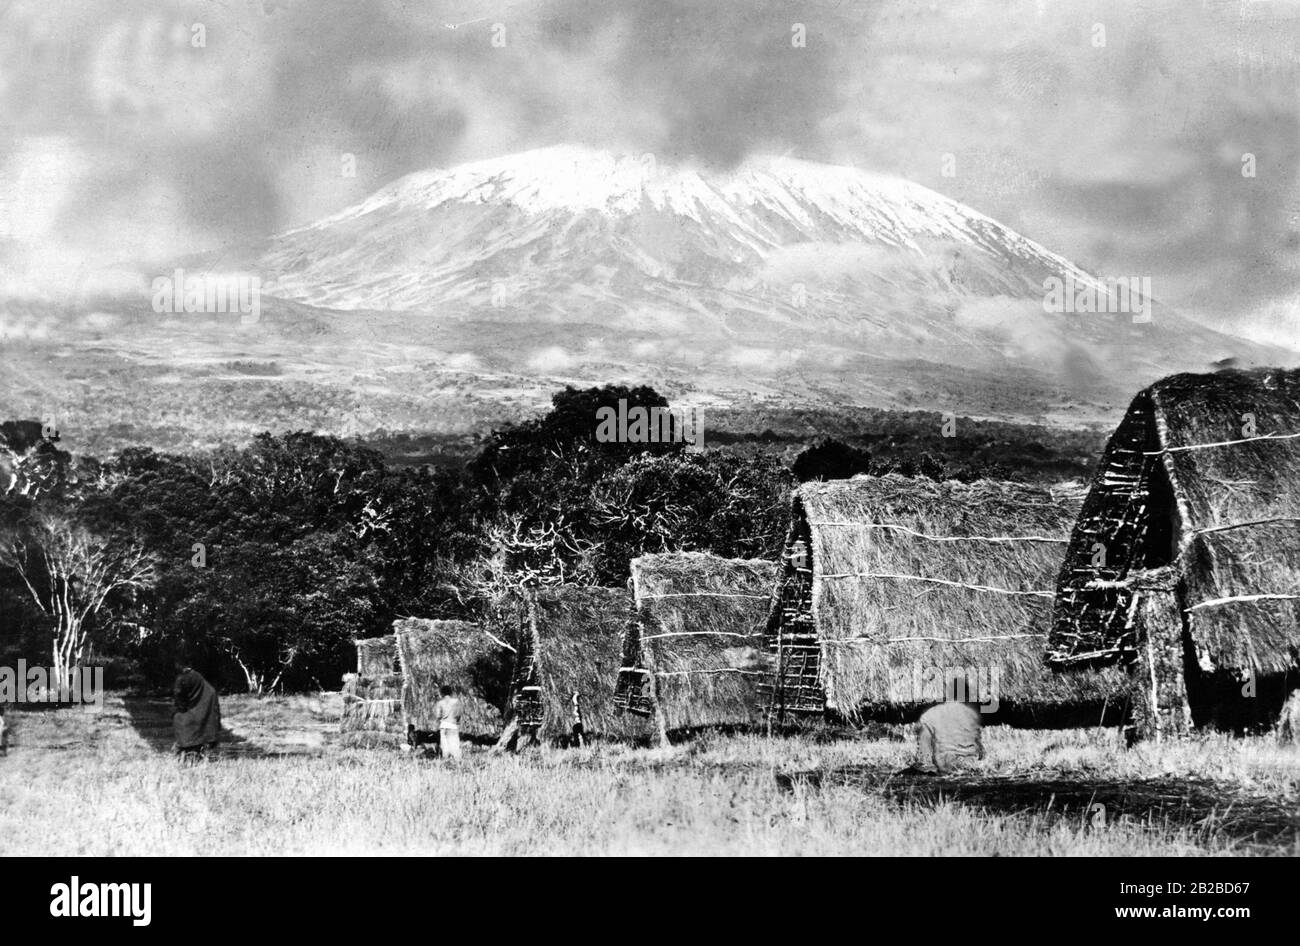 Straw huts in front of a snowy mountain in German East Africa, probably a summit of Kilimanjaro. Undated photo. Stock Photo